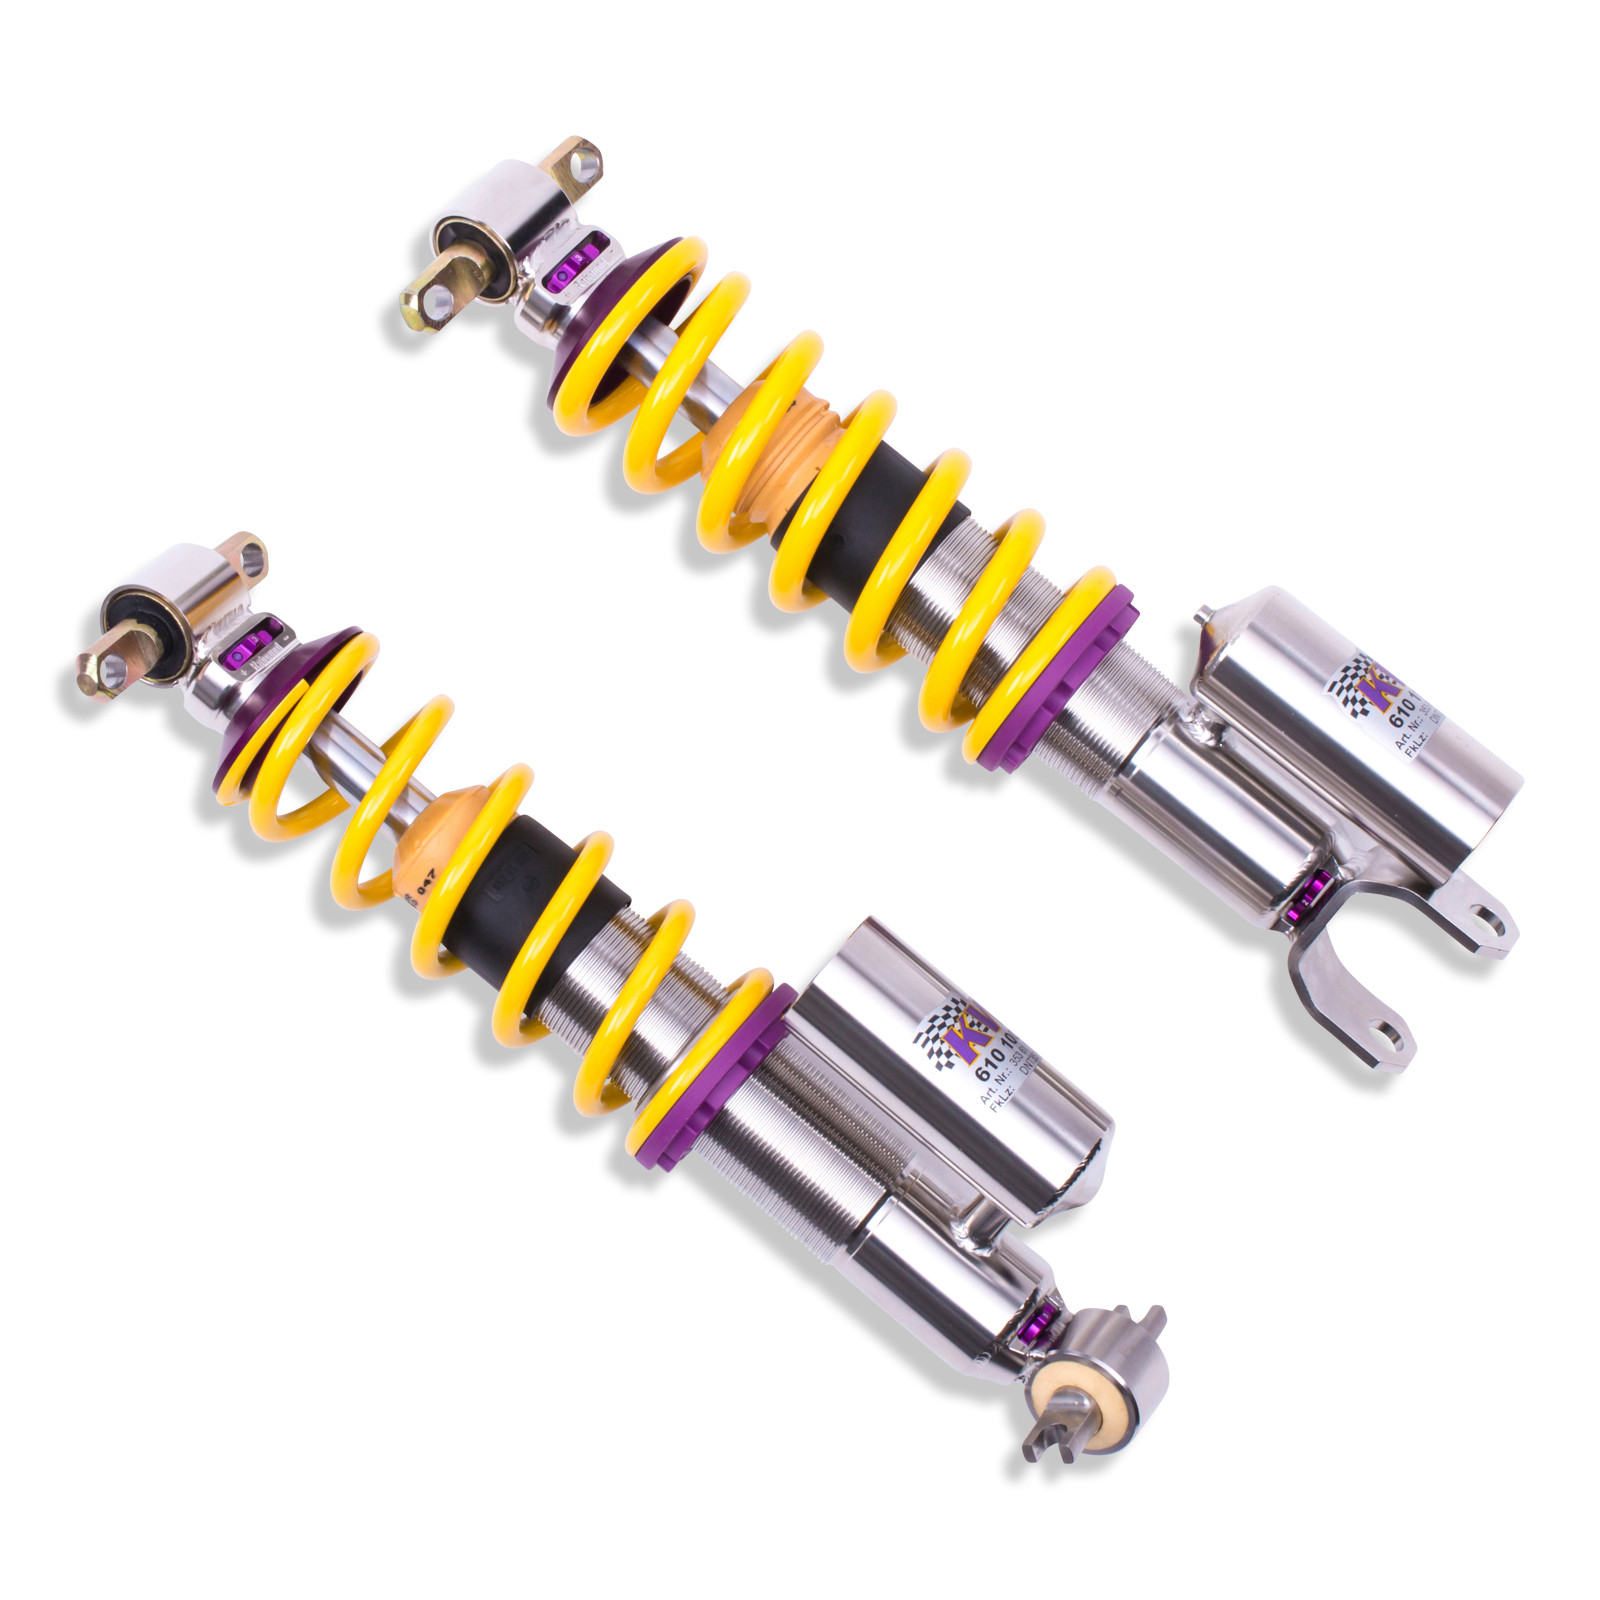 KW V3 Coilovers